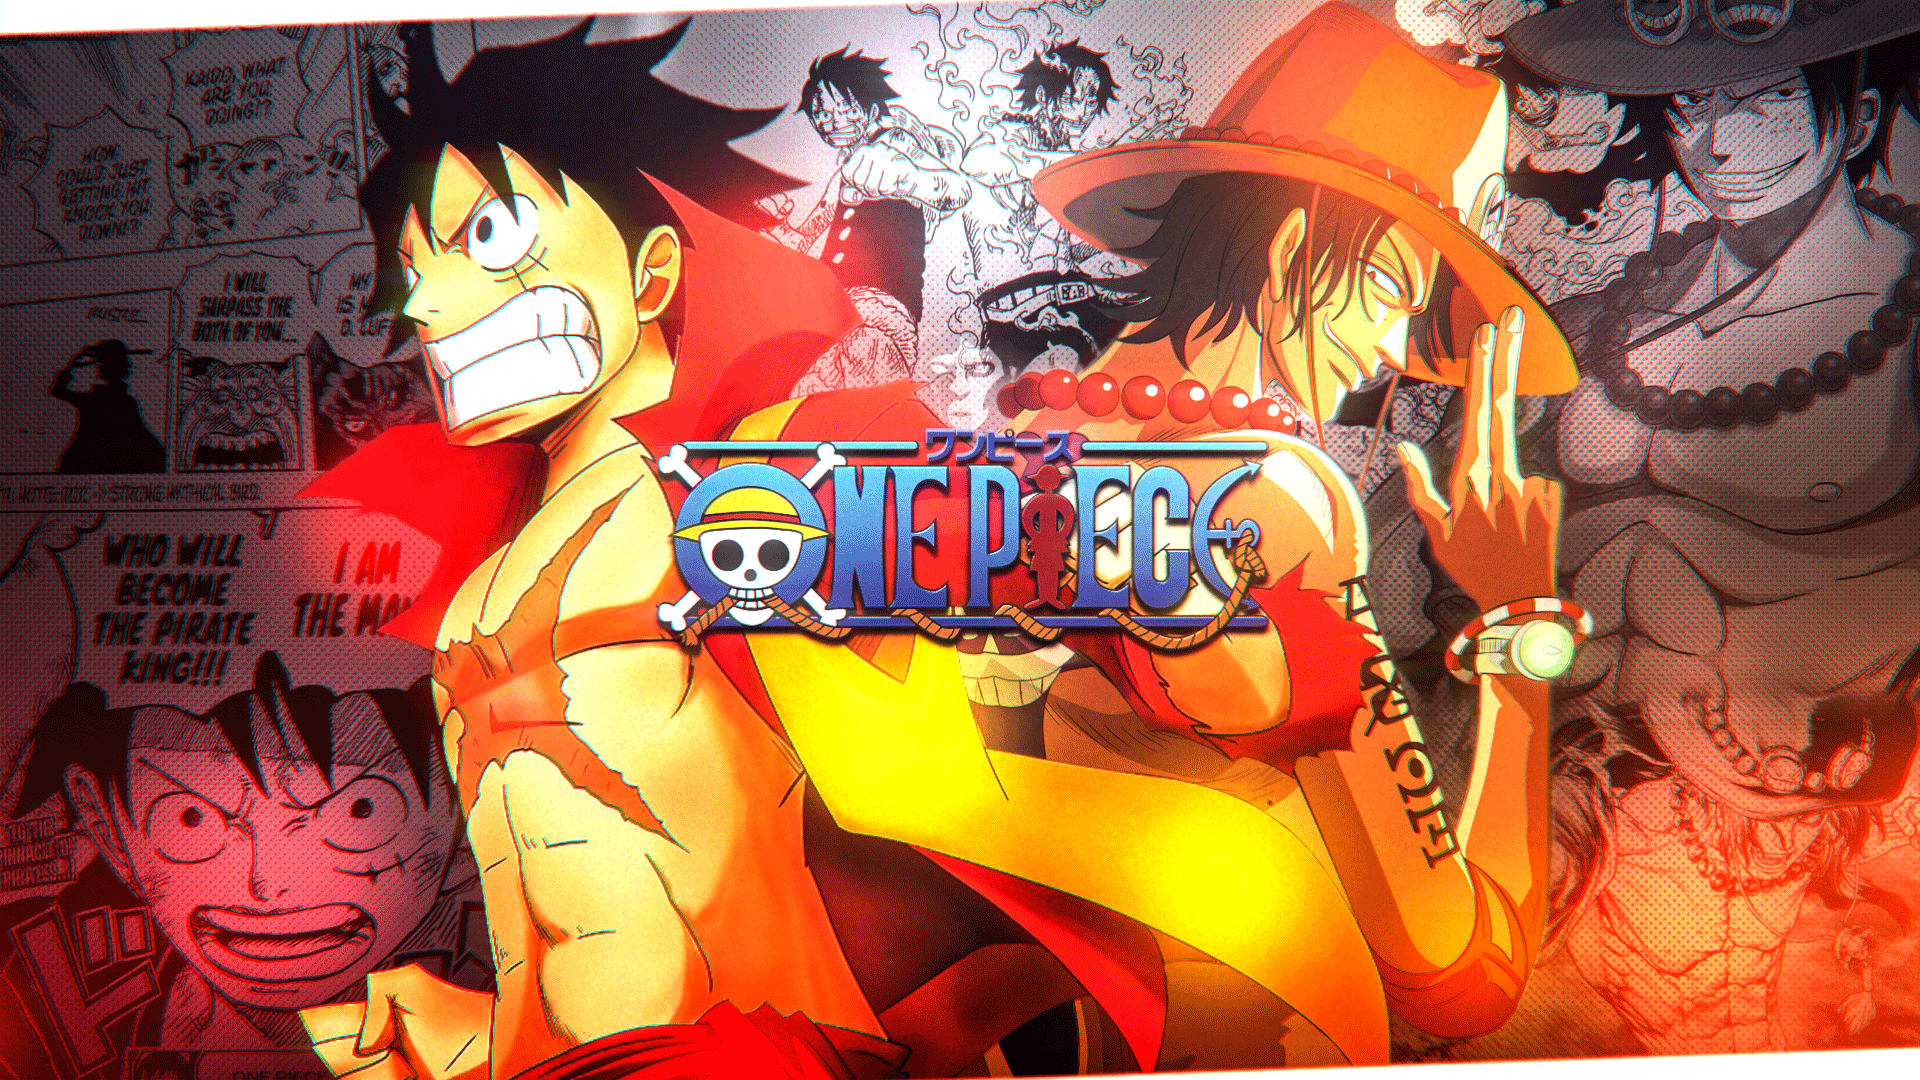 NYF (ジェレミー) D Luffy x Portgas D Ace desktop wallpaper. End of the month freebie! Feel free to download & use! Download Here: #Anime #ONEPIECE #MonkeyDLuffy #PortgasDAce